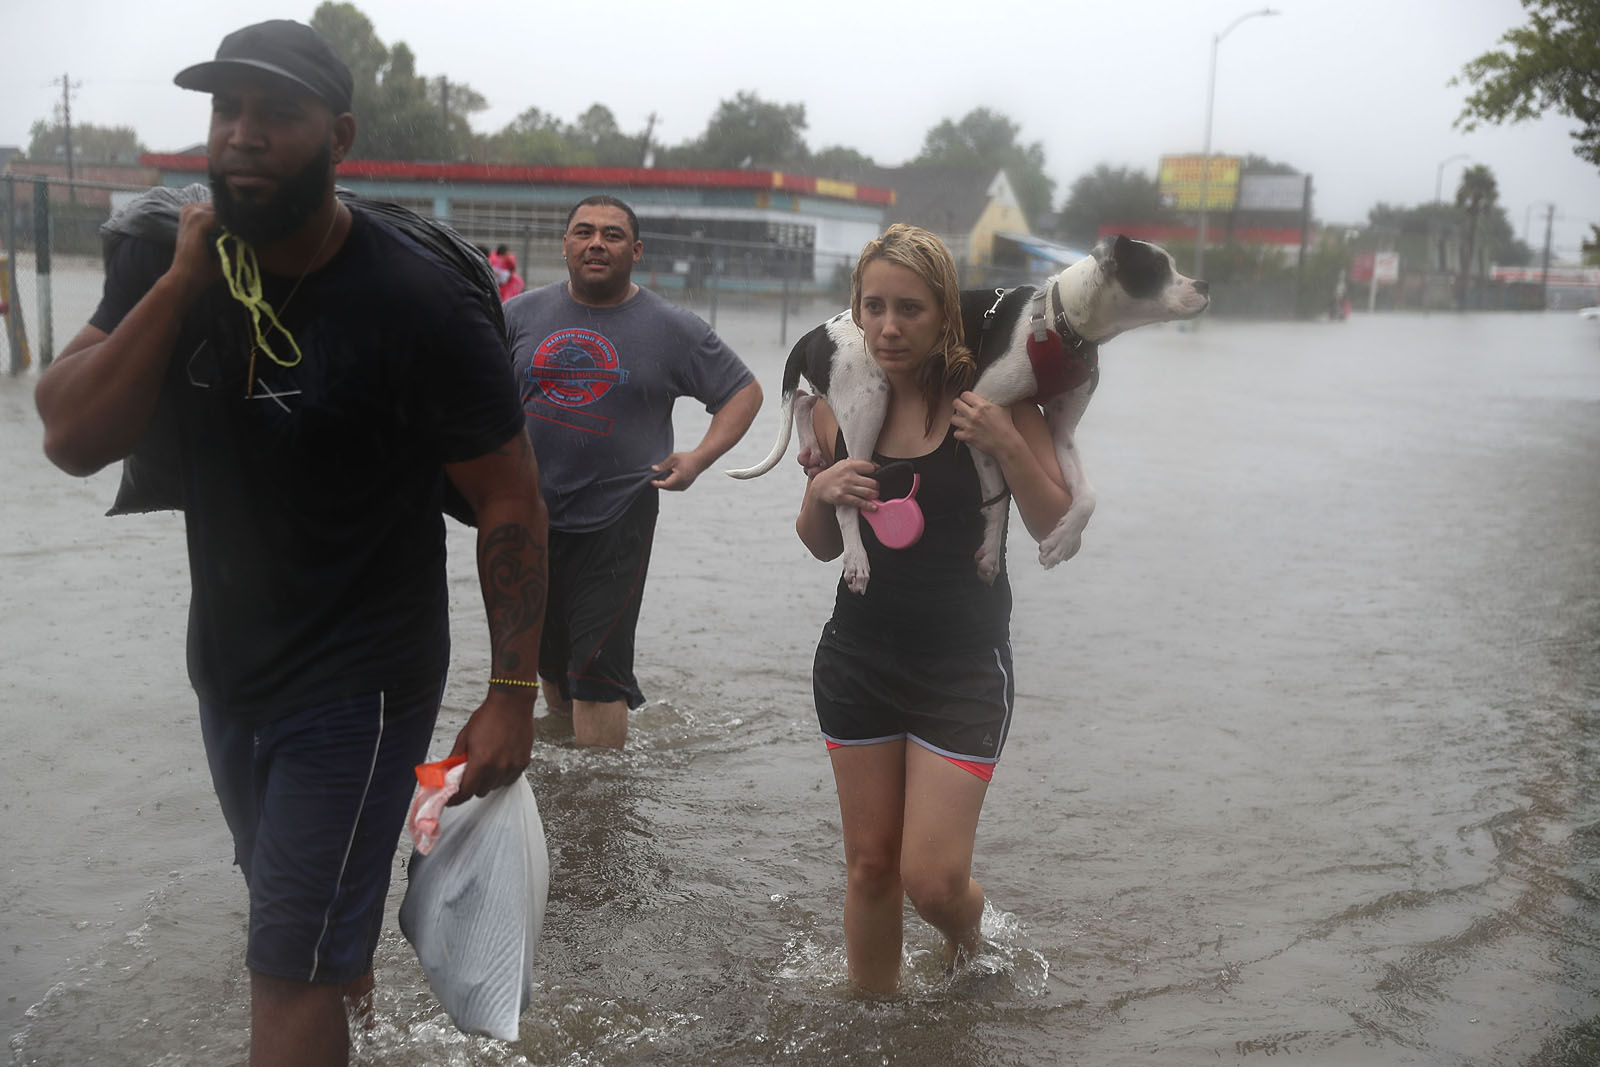 Naomi Coto carries Simba on her shoulders as they evacuate their home after the area was inundated with flooding from Hurricane Harvey on August 27, 2017 in Houston, Texas. Harvey, which made landfall north of Corpus Christi late Friday evening, is expected to dump upwards to 40 inches of rain in Texas over the next couple of days.  (Photo by Joe Raedle/Getty Images)